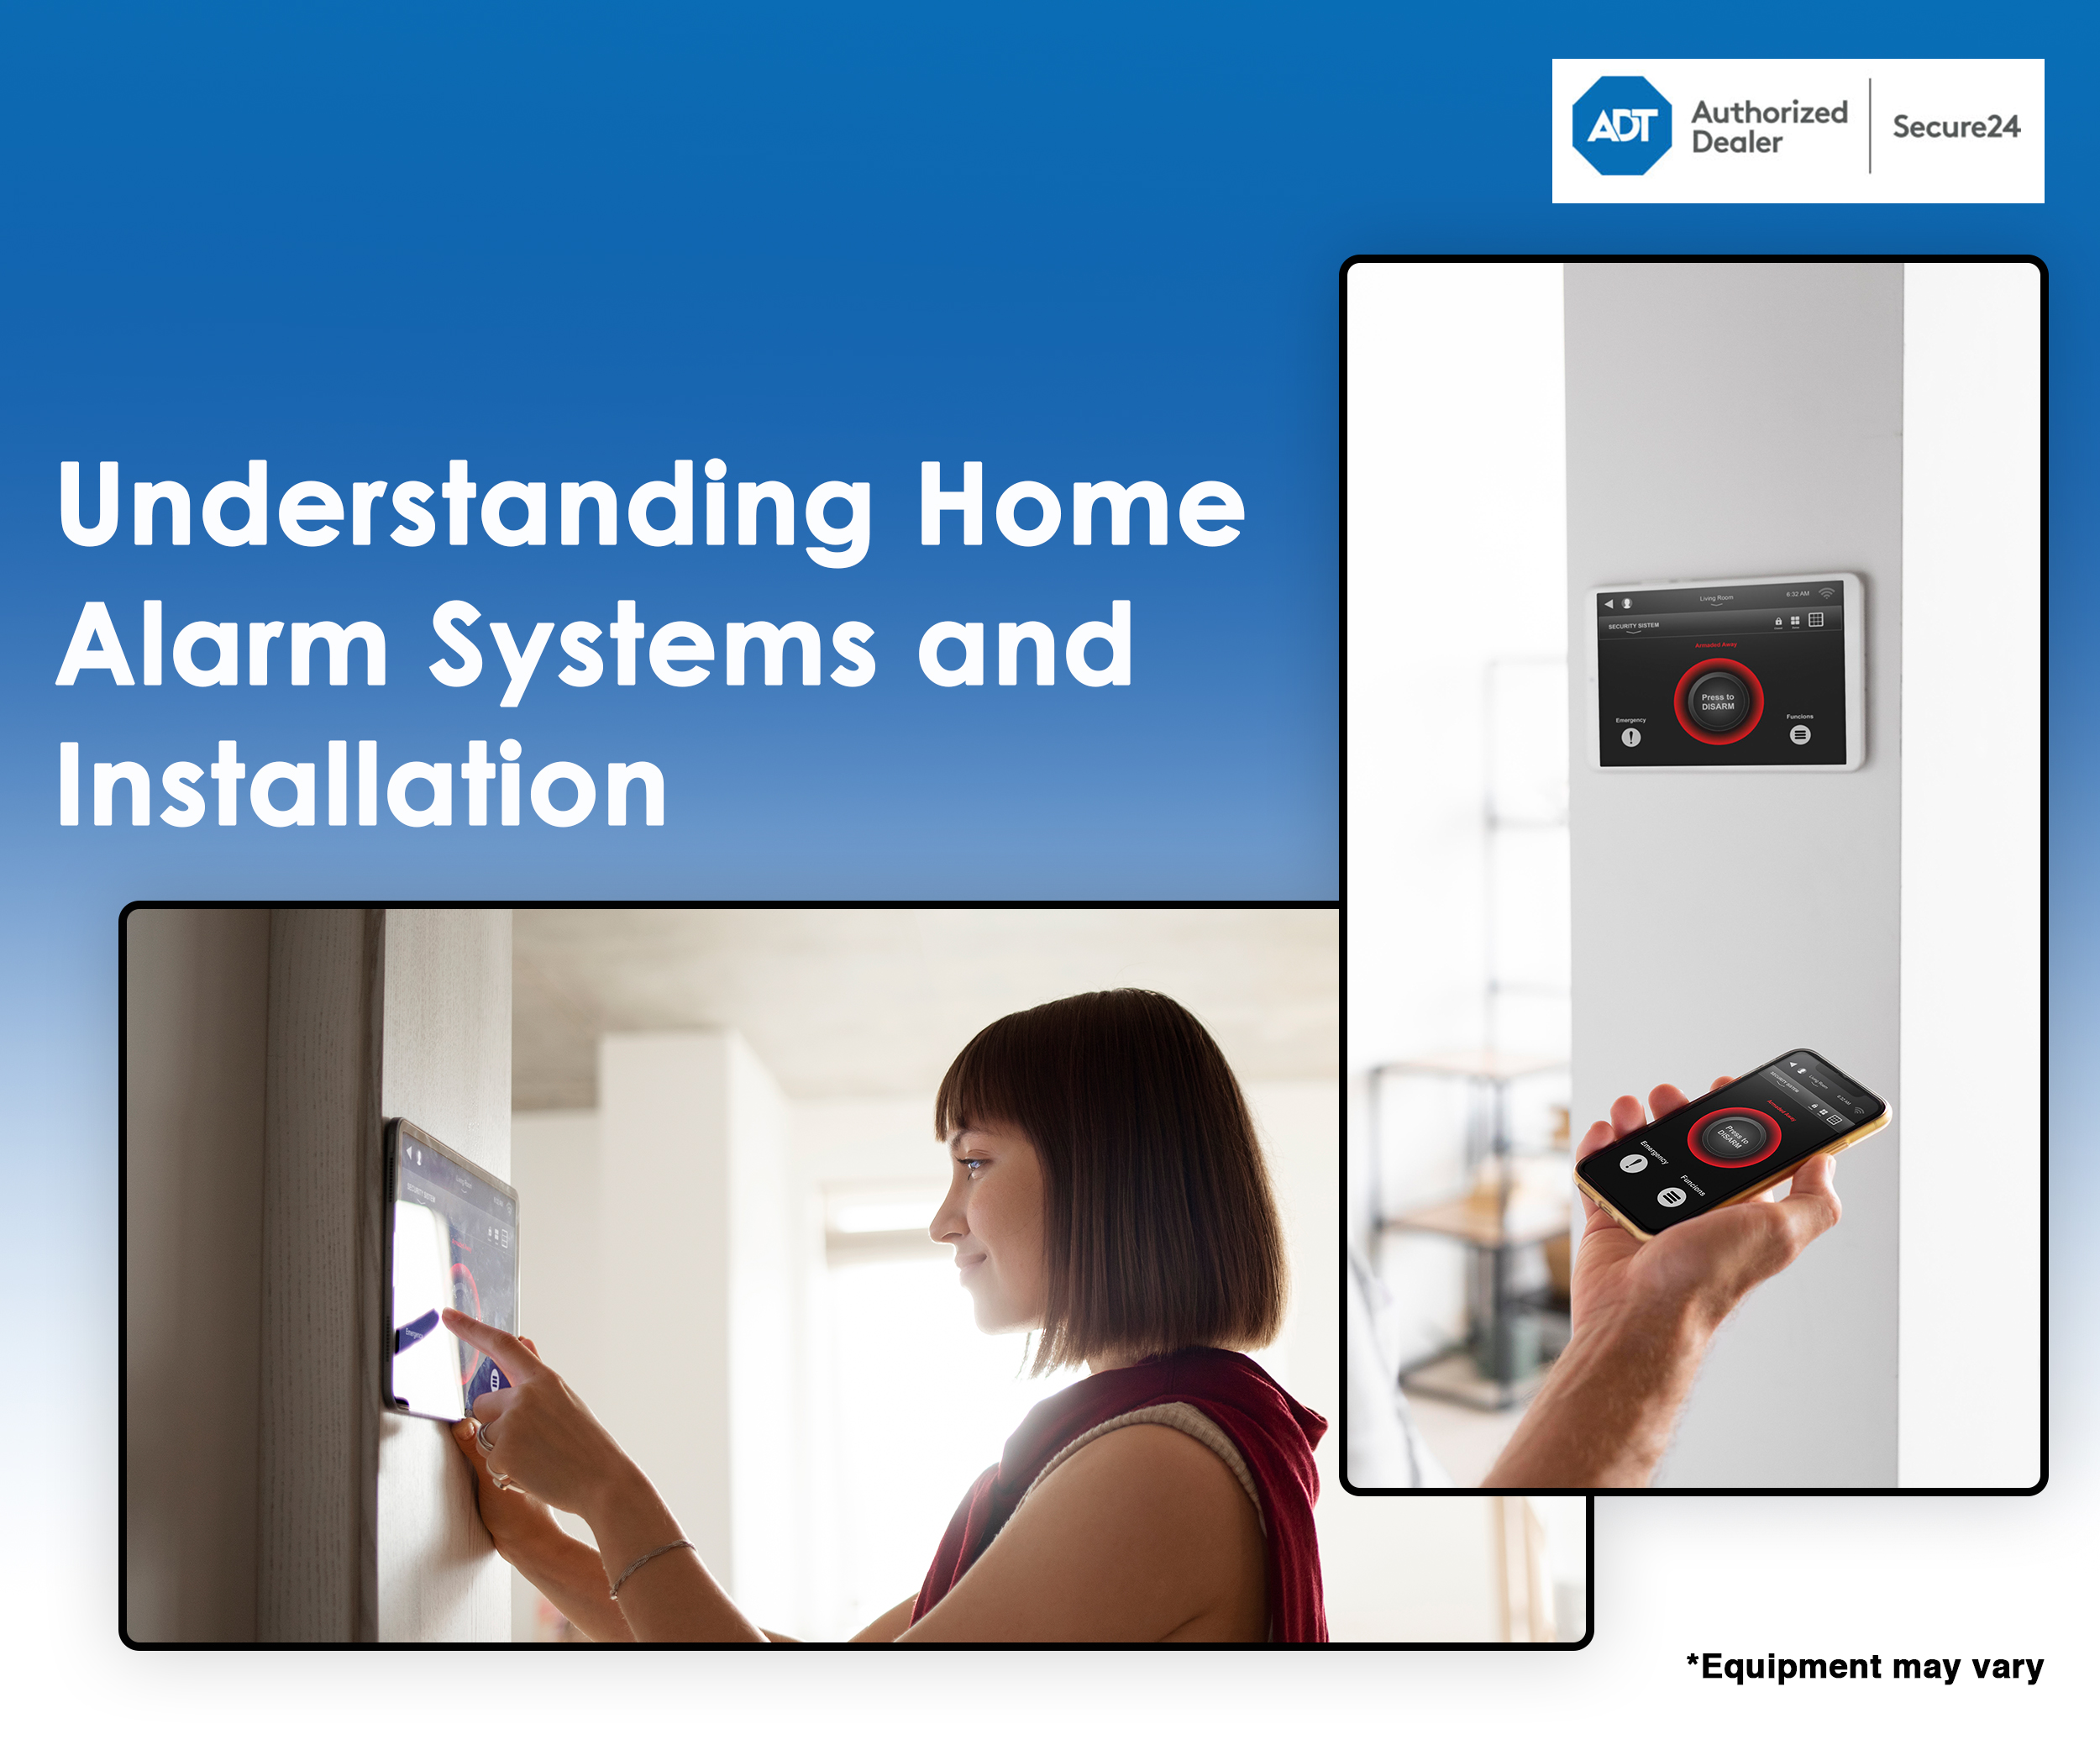 Home Alarm Systems and Installation